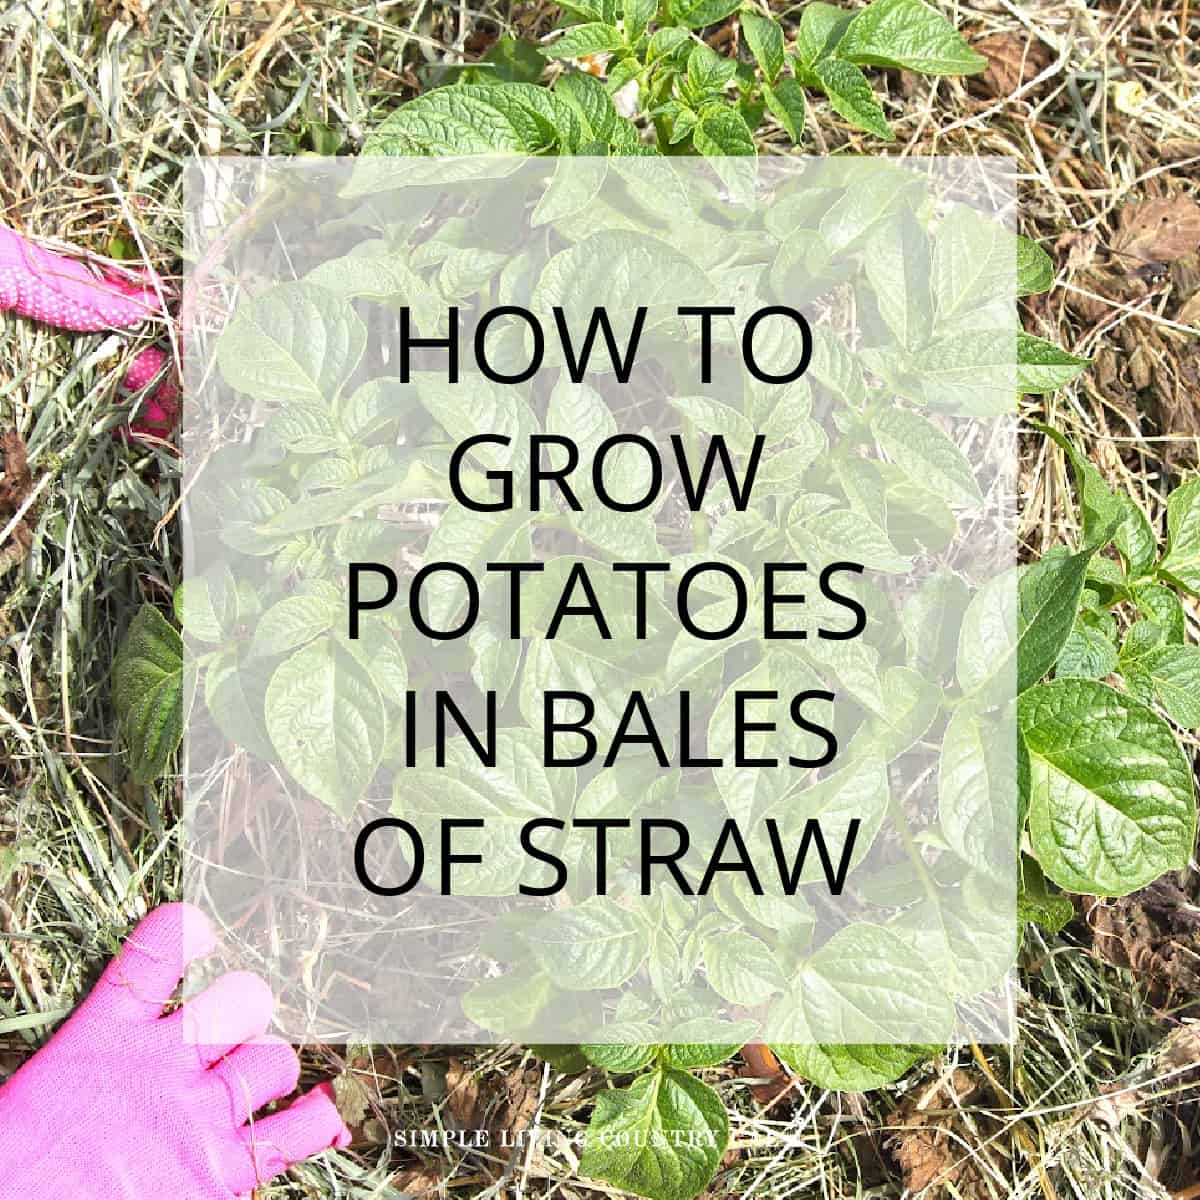 Growing potatoes in straw bales